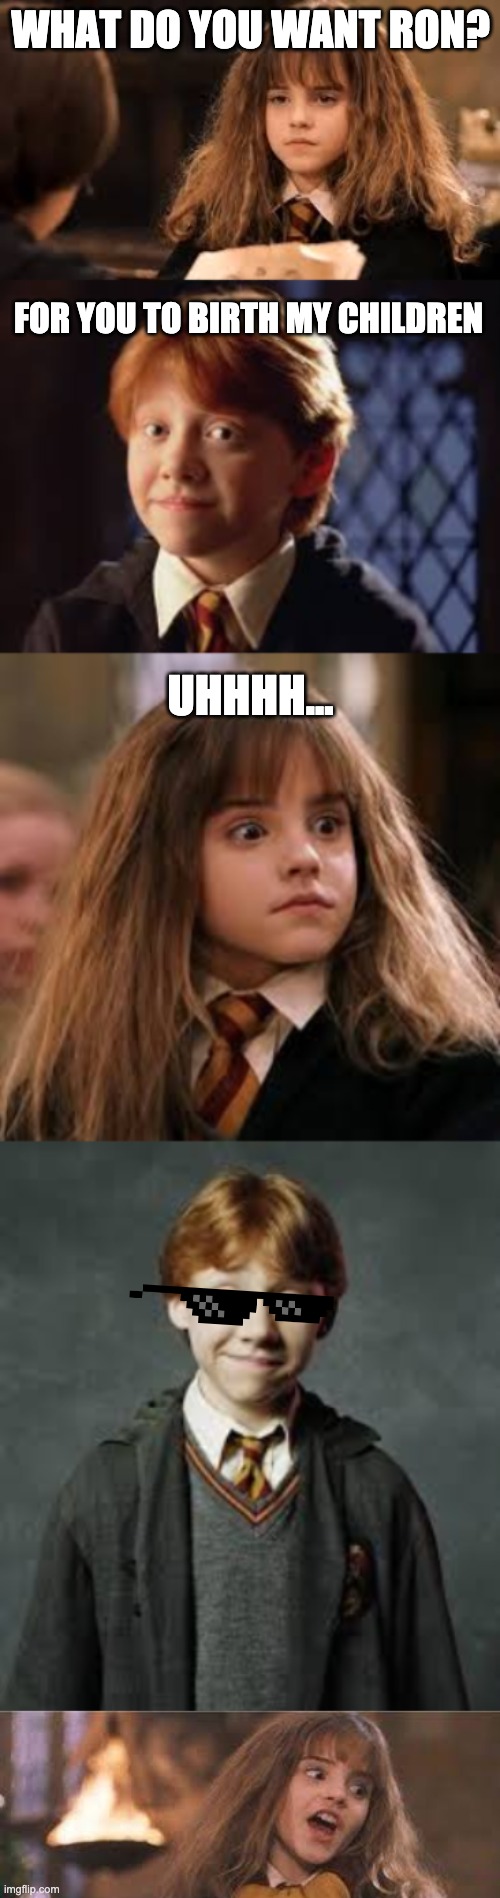 Now who needs to sort out their priorities? | WHAT DO YOU WANT RON? FOR YOU TO BIRTH MY CHILDREN; UHHHH... | image tagged in ron weasley,hermione granger,deal with it | made w/ Imgflip meme maker